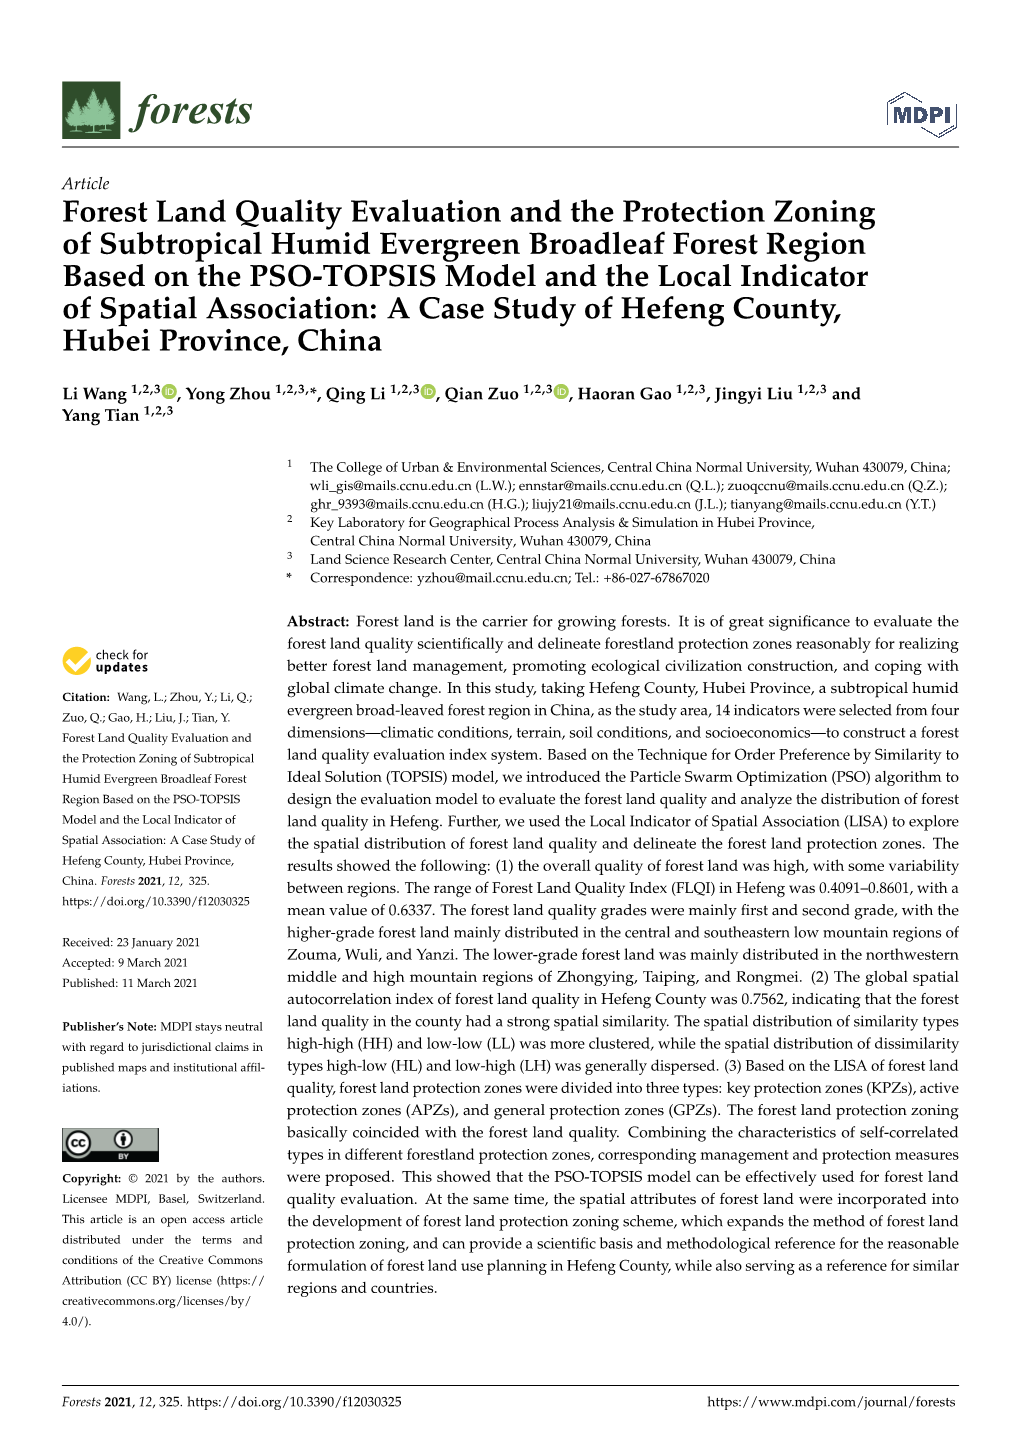 Forest Land Quality Evaluation and the Protection Zoning of Subtropical